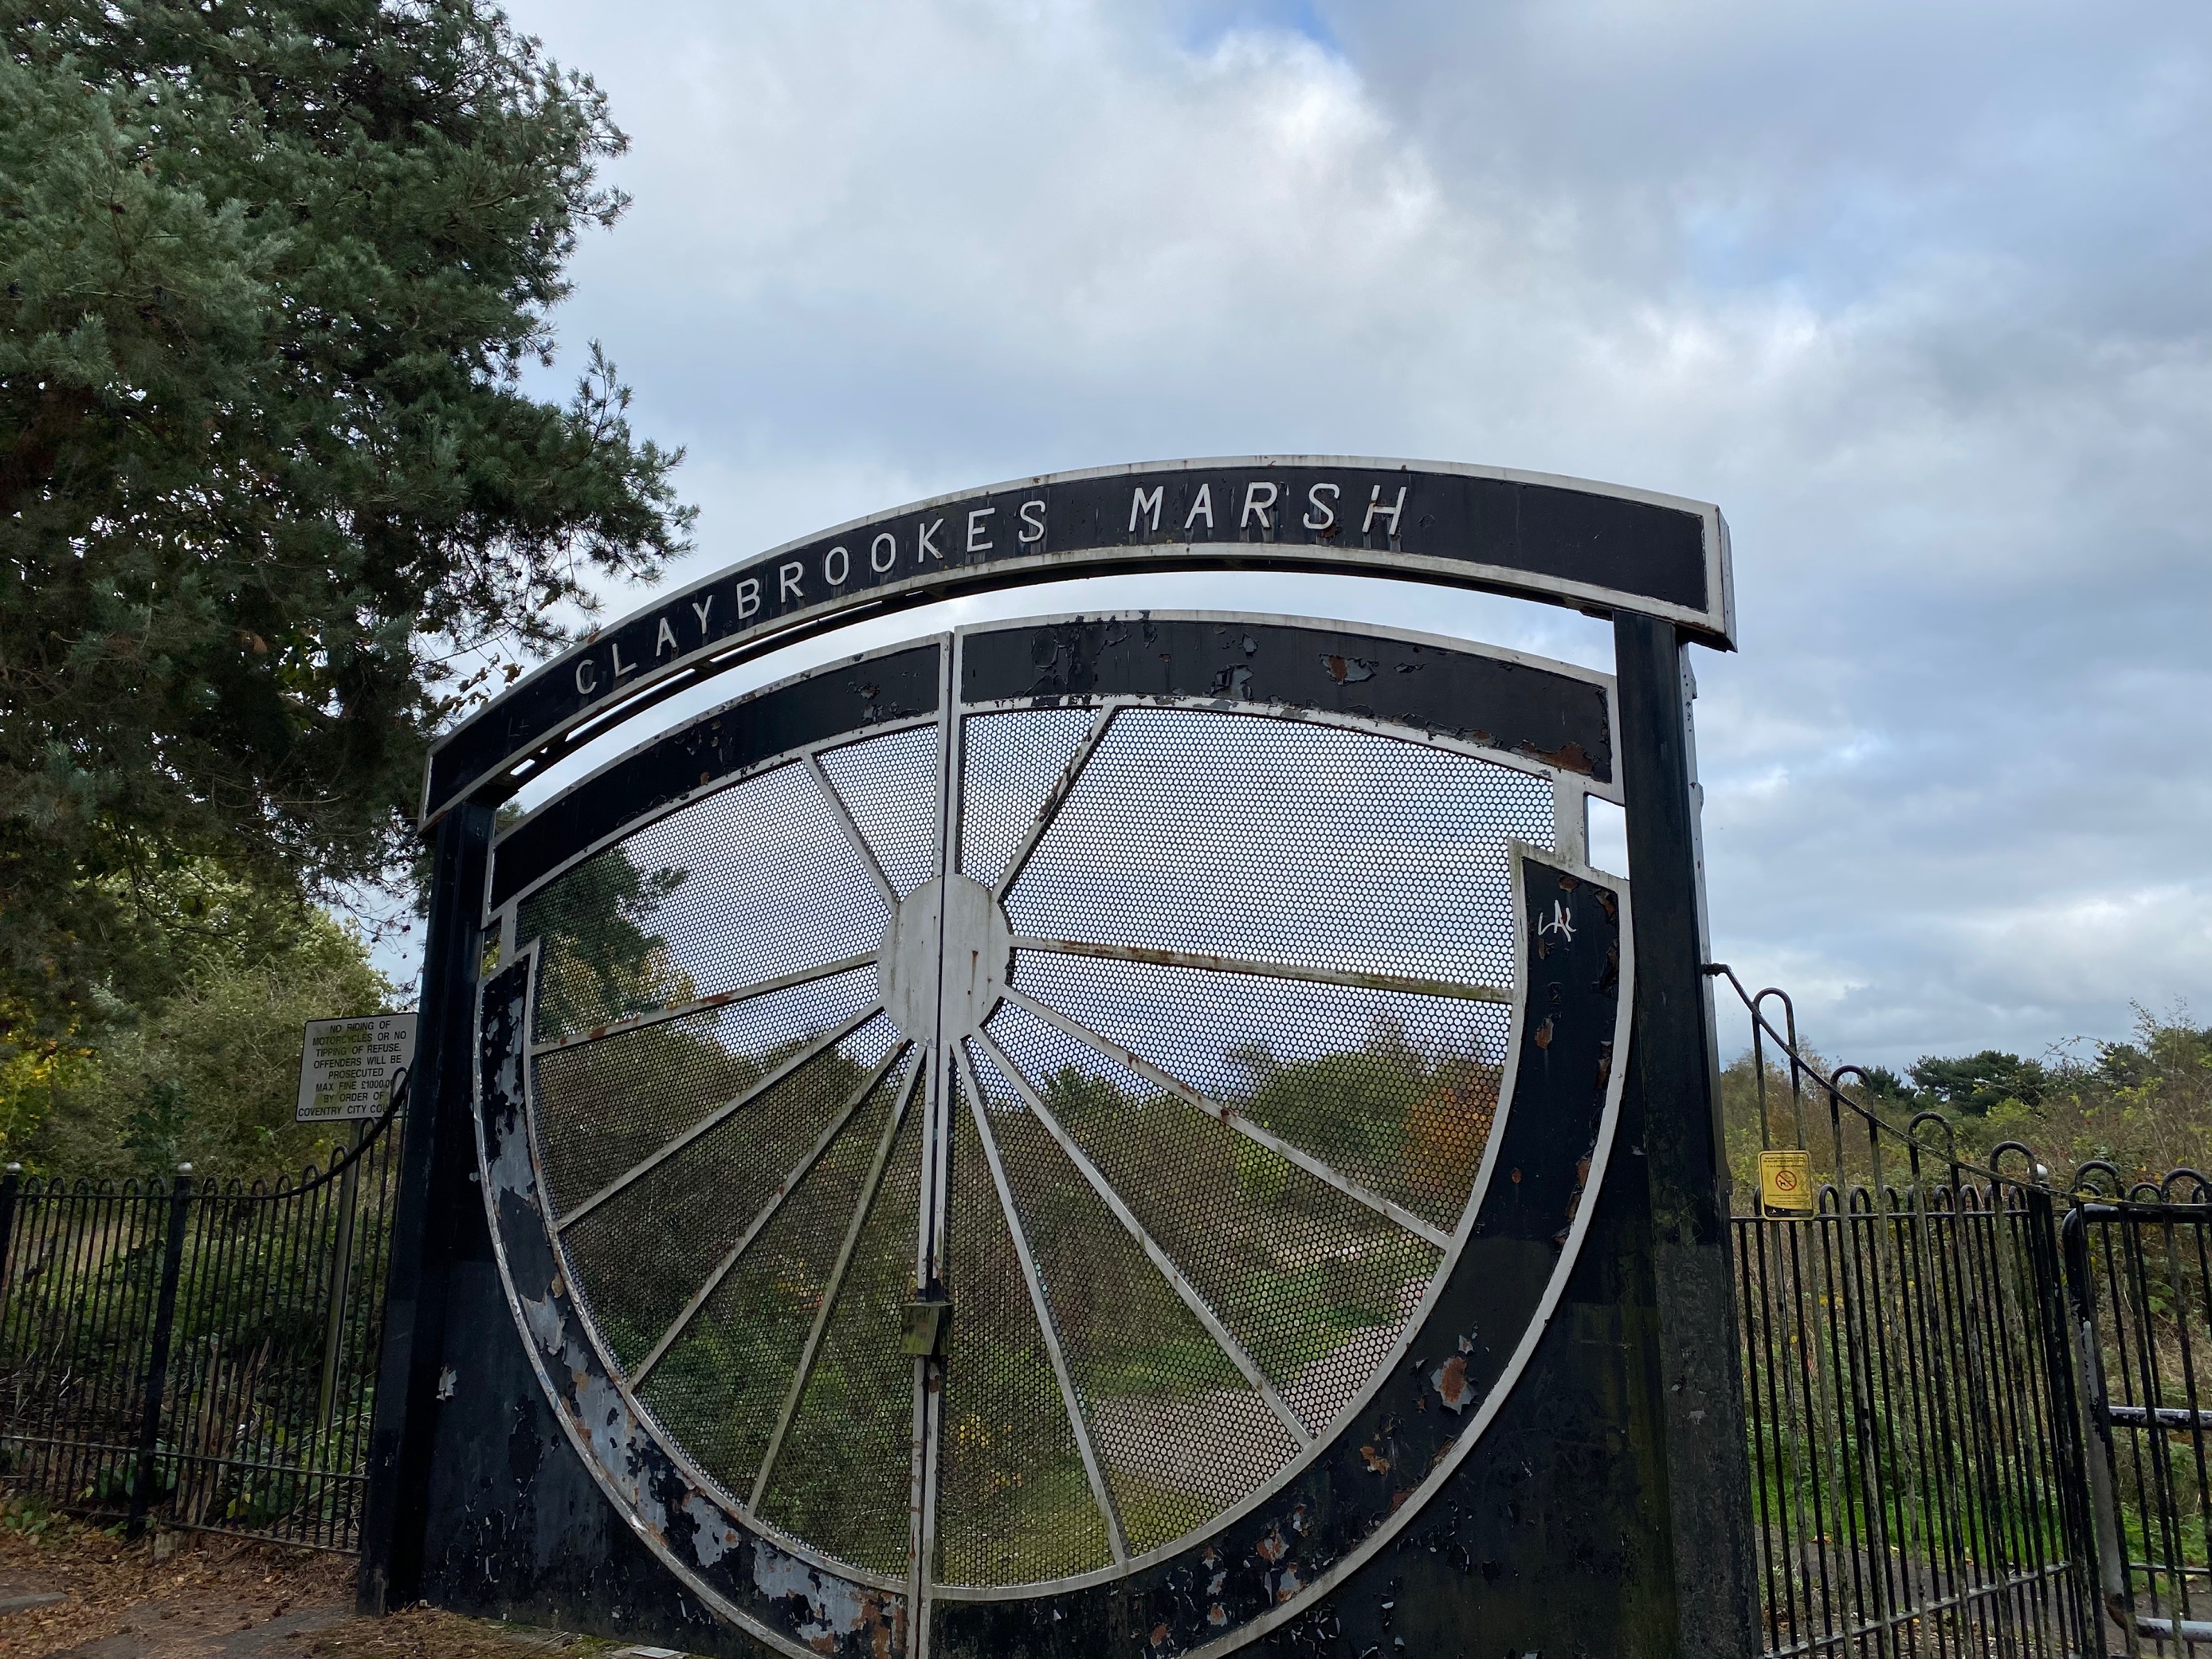 Picture showing the entrance gates to Claybrookes Marsh nature reserve. The gates are tall and made of metal, decorated with a pattern like spokes of a wheel and topped with the nature reserve's name. In the background you can see the nature reserve looking autumnal.